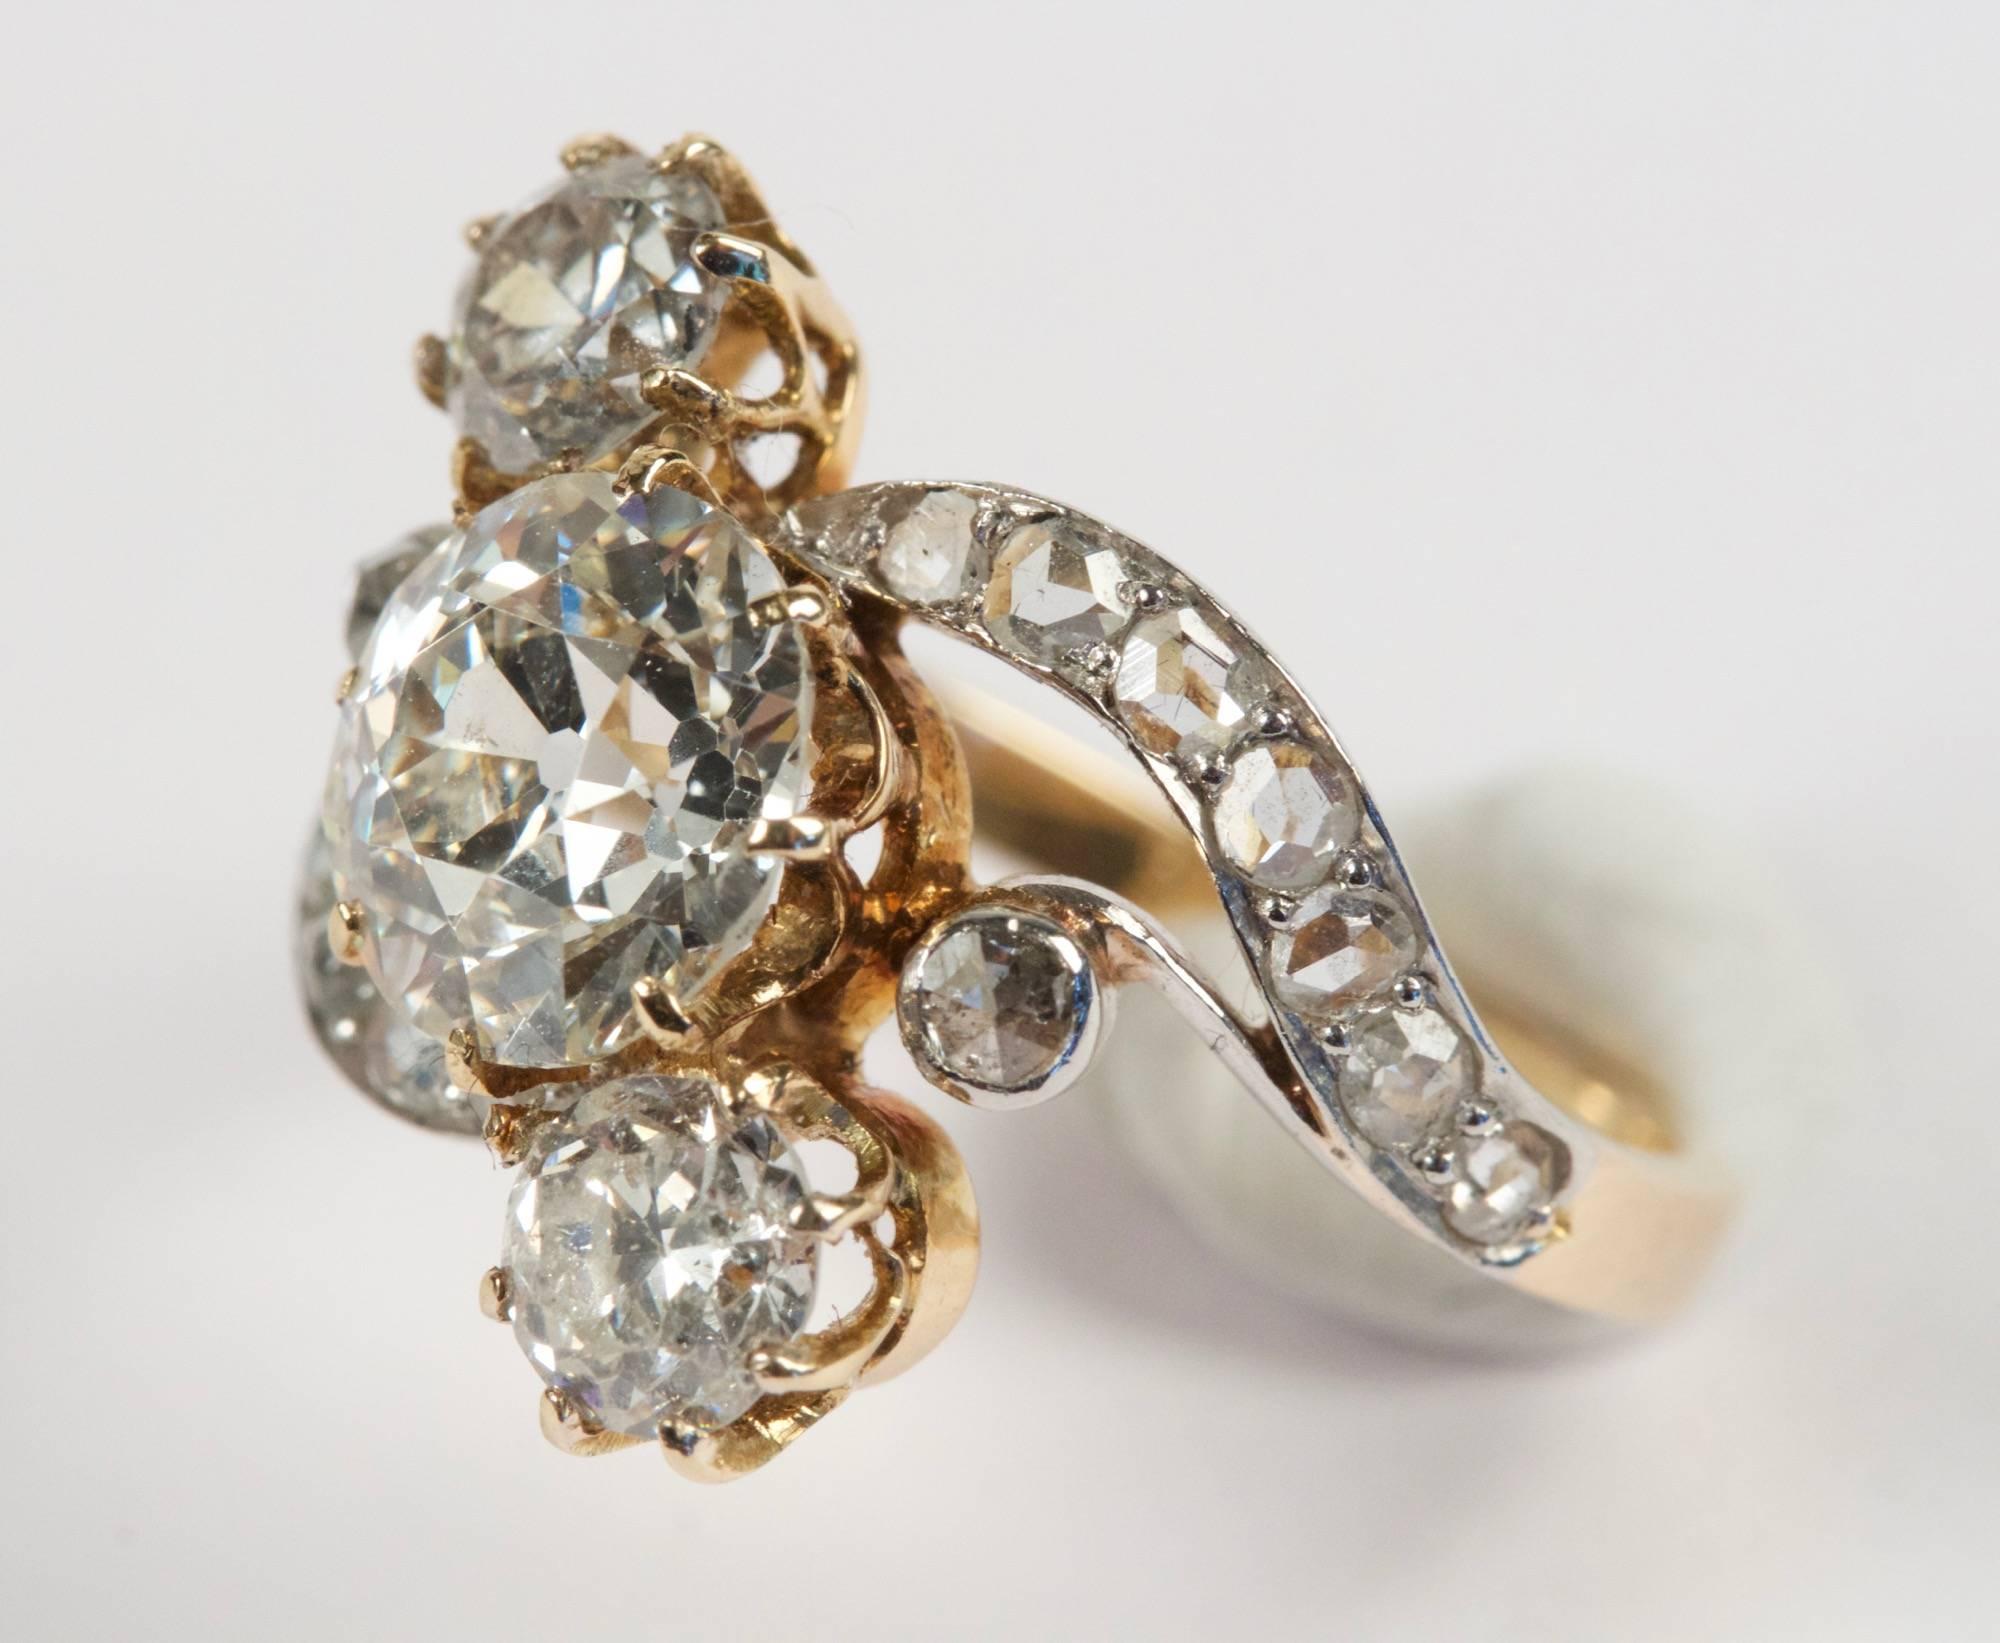 18k gold ring with set in its middle an approximately 1.70 carats old cut diamond  and two brillant cut diamonds of an approximately 0.50 carats total weight. French work. Circa 1900.